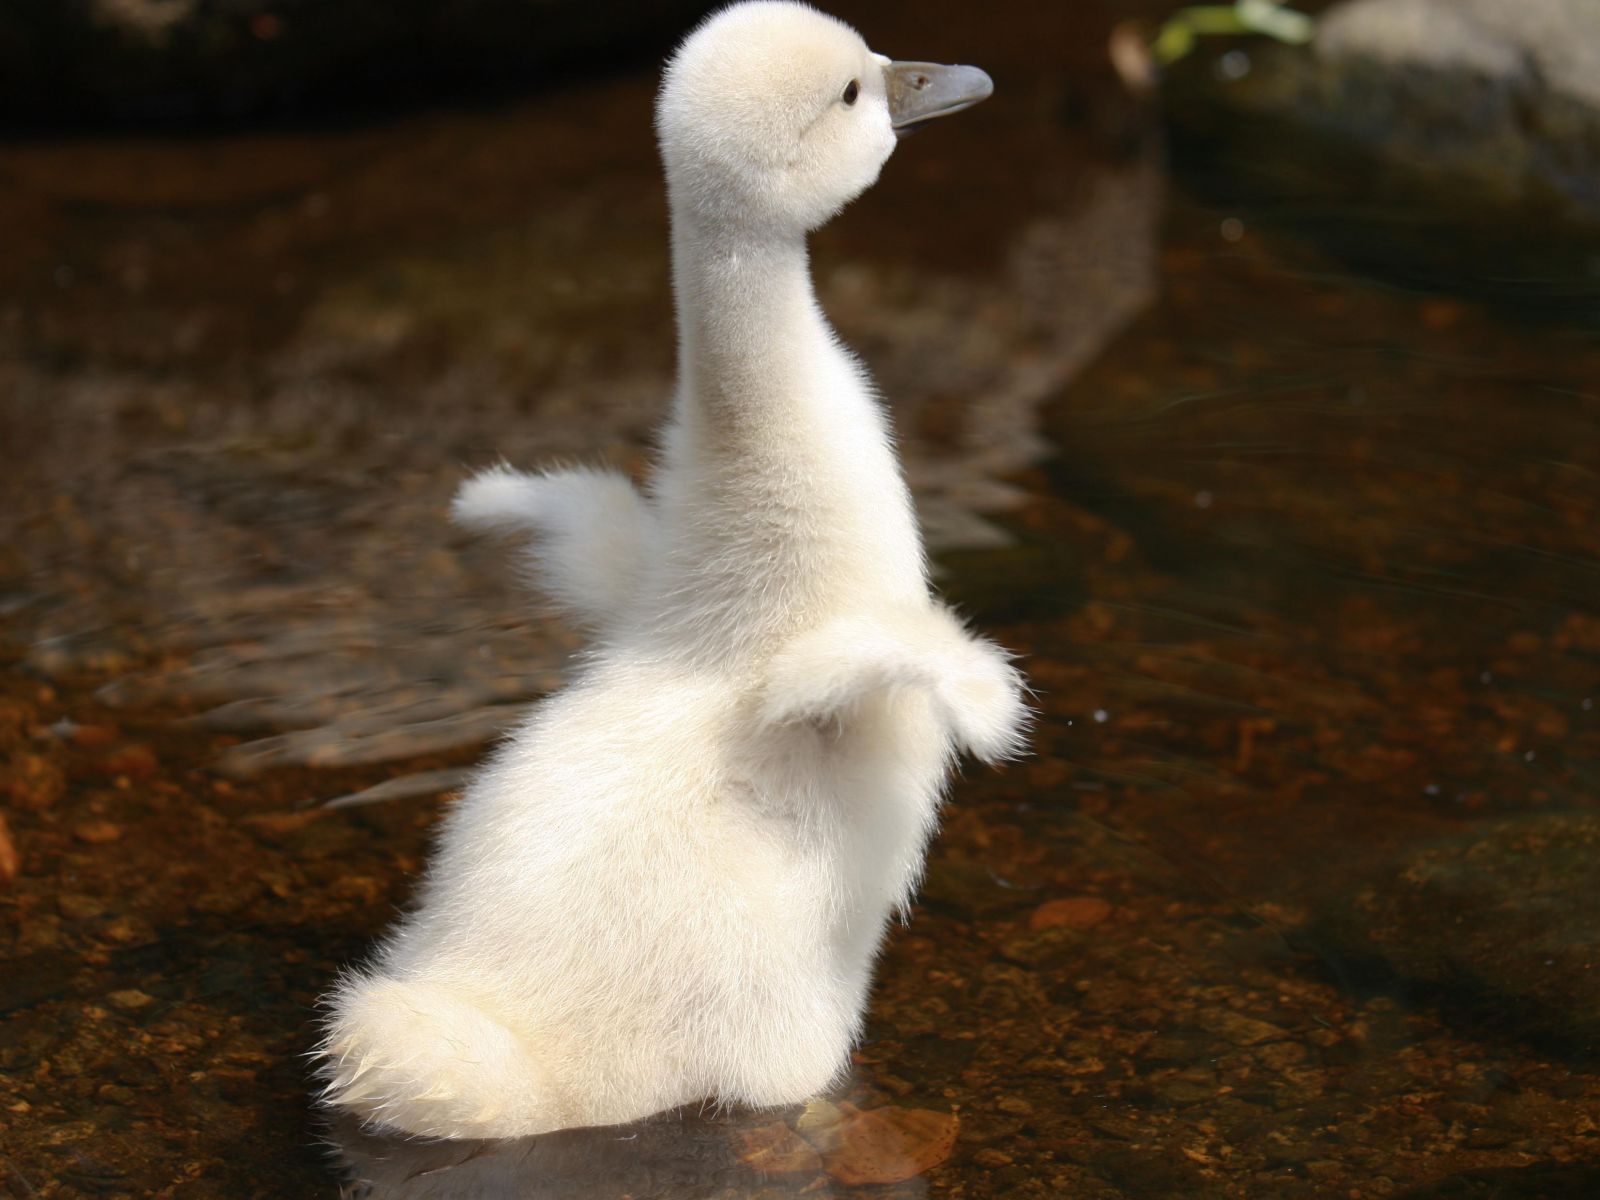 Cute white baby duck gosling duckling 2012 free download wallpapers